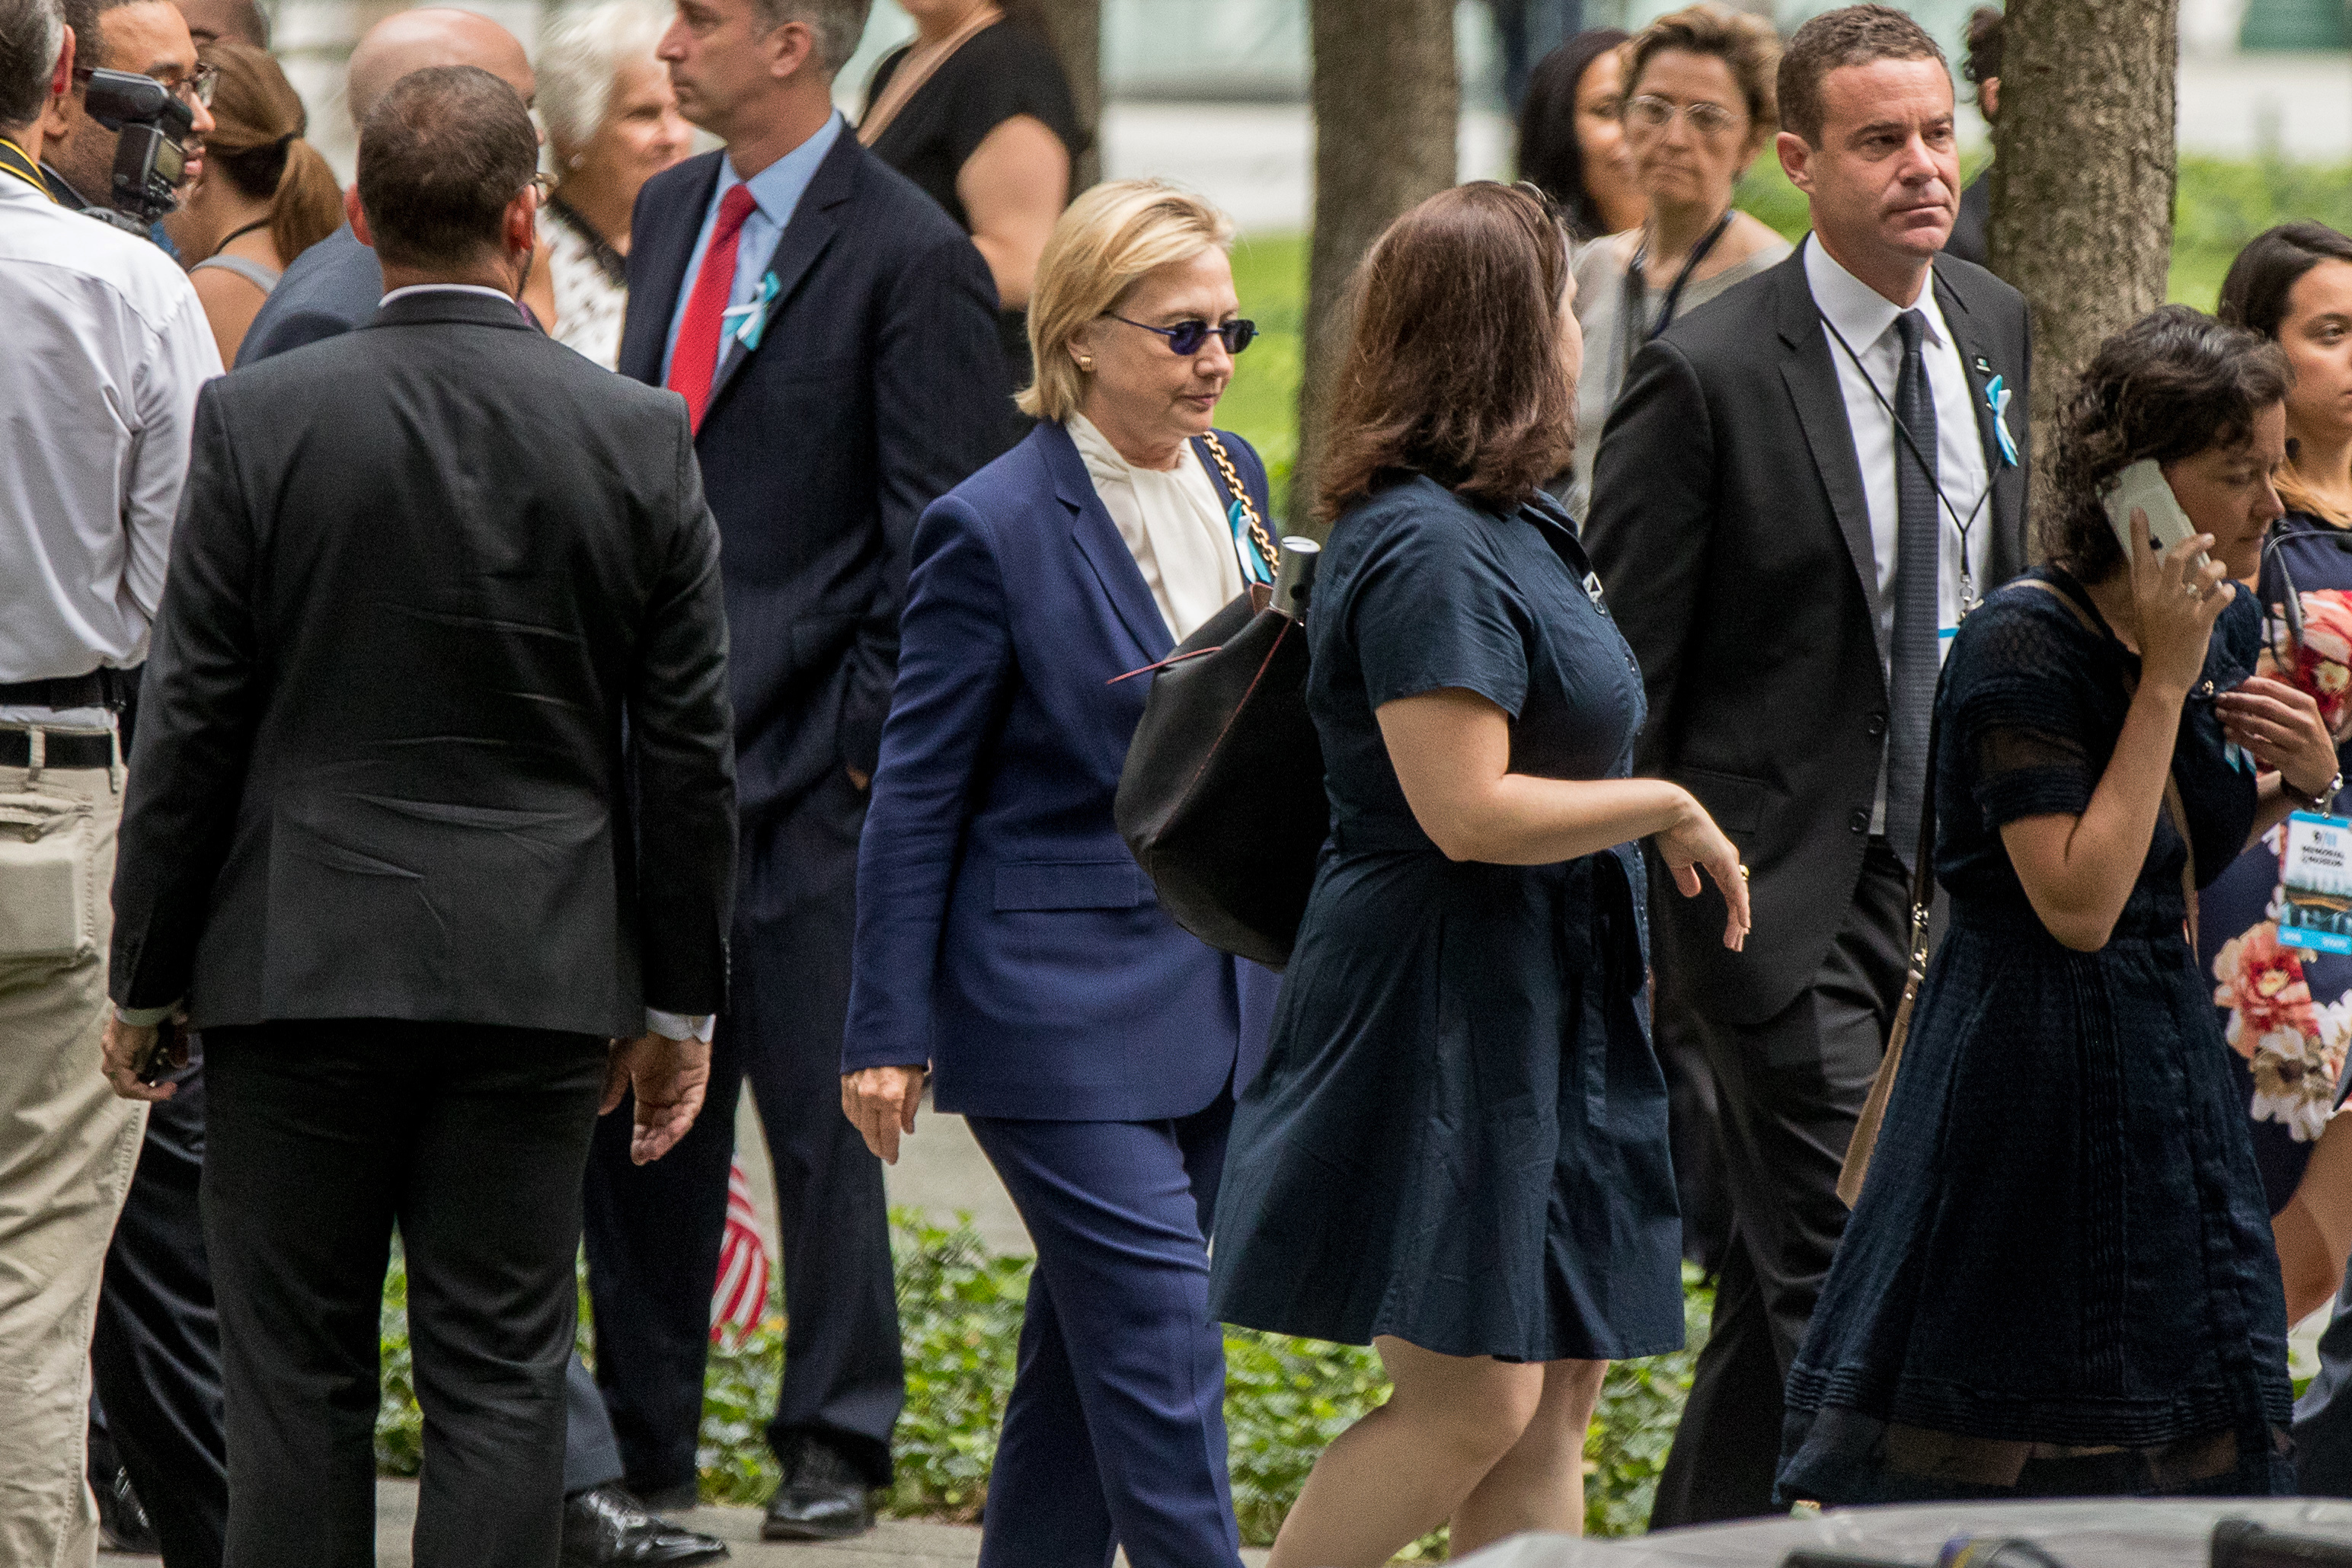 Democratic presidential candidate Hillary Clinton arrives to attend a ceremony at the National September 11 Memorial, in New York, Sunday, Sept. 11, 2016, on the 15th anniversary of the Sept. 11 attacks. (AP Photo/Andrew Harnik)